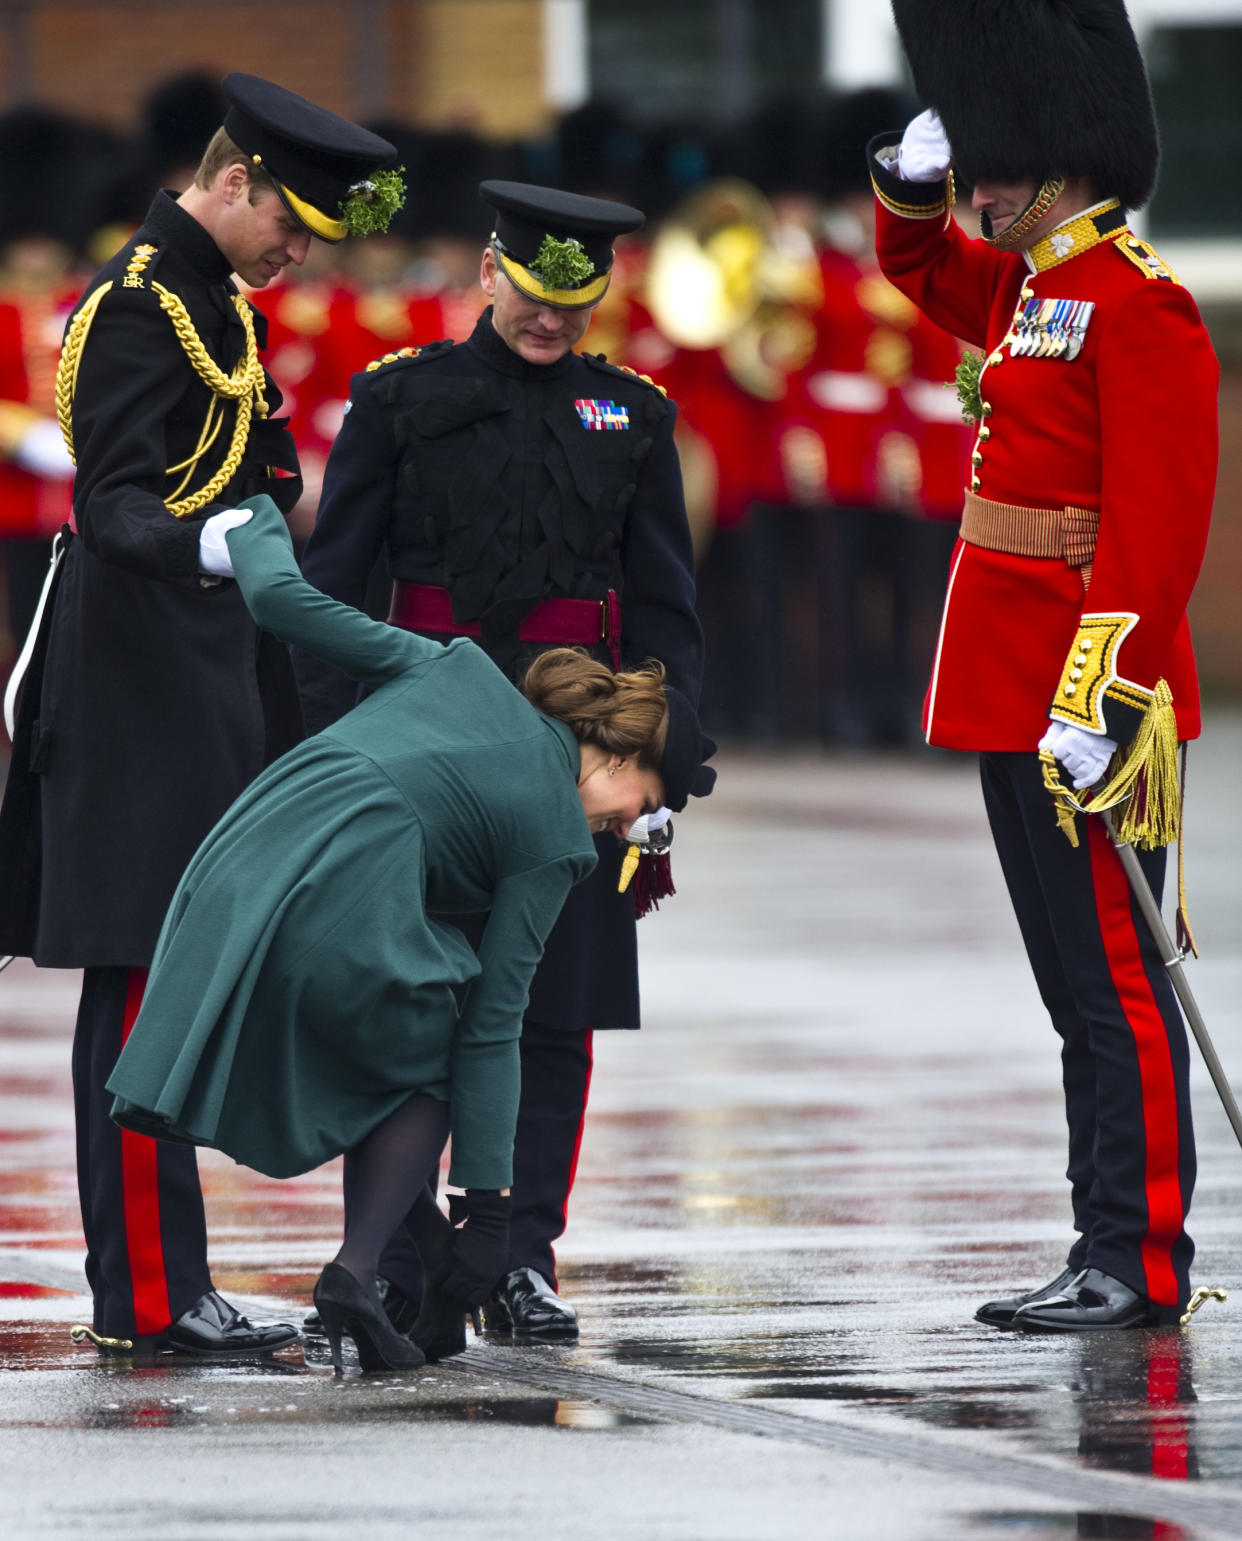 ALDERSHOT, ENGLAND - MARCH 17:  Prince William, Duke of Cambridge helps Catherine Duchess of Cambridge as her heel gets stuck in the grating during the Irish Guards' St Patrick's Day Parade at Mons Barracks on March 17, 2013 in Aldershot, England.  (Photo by Antony Jones/UK Press via Getty Images)